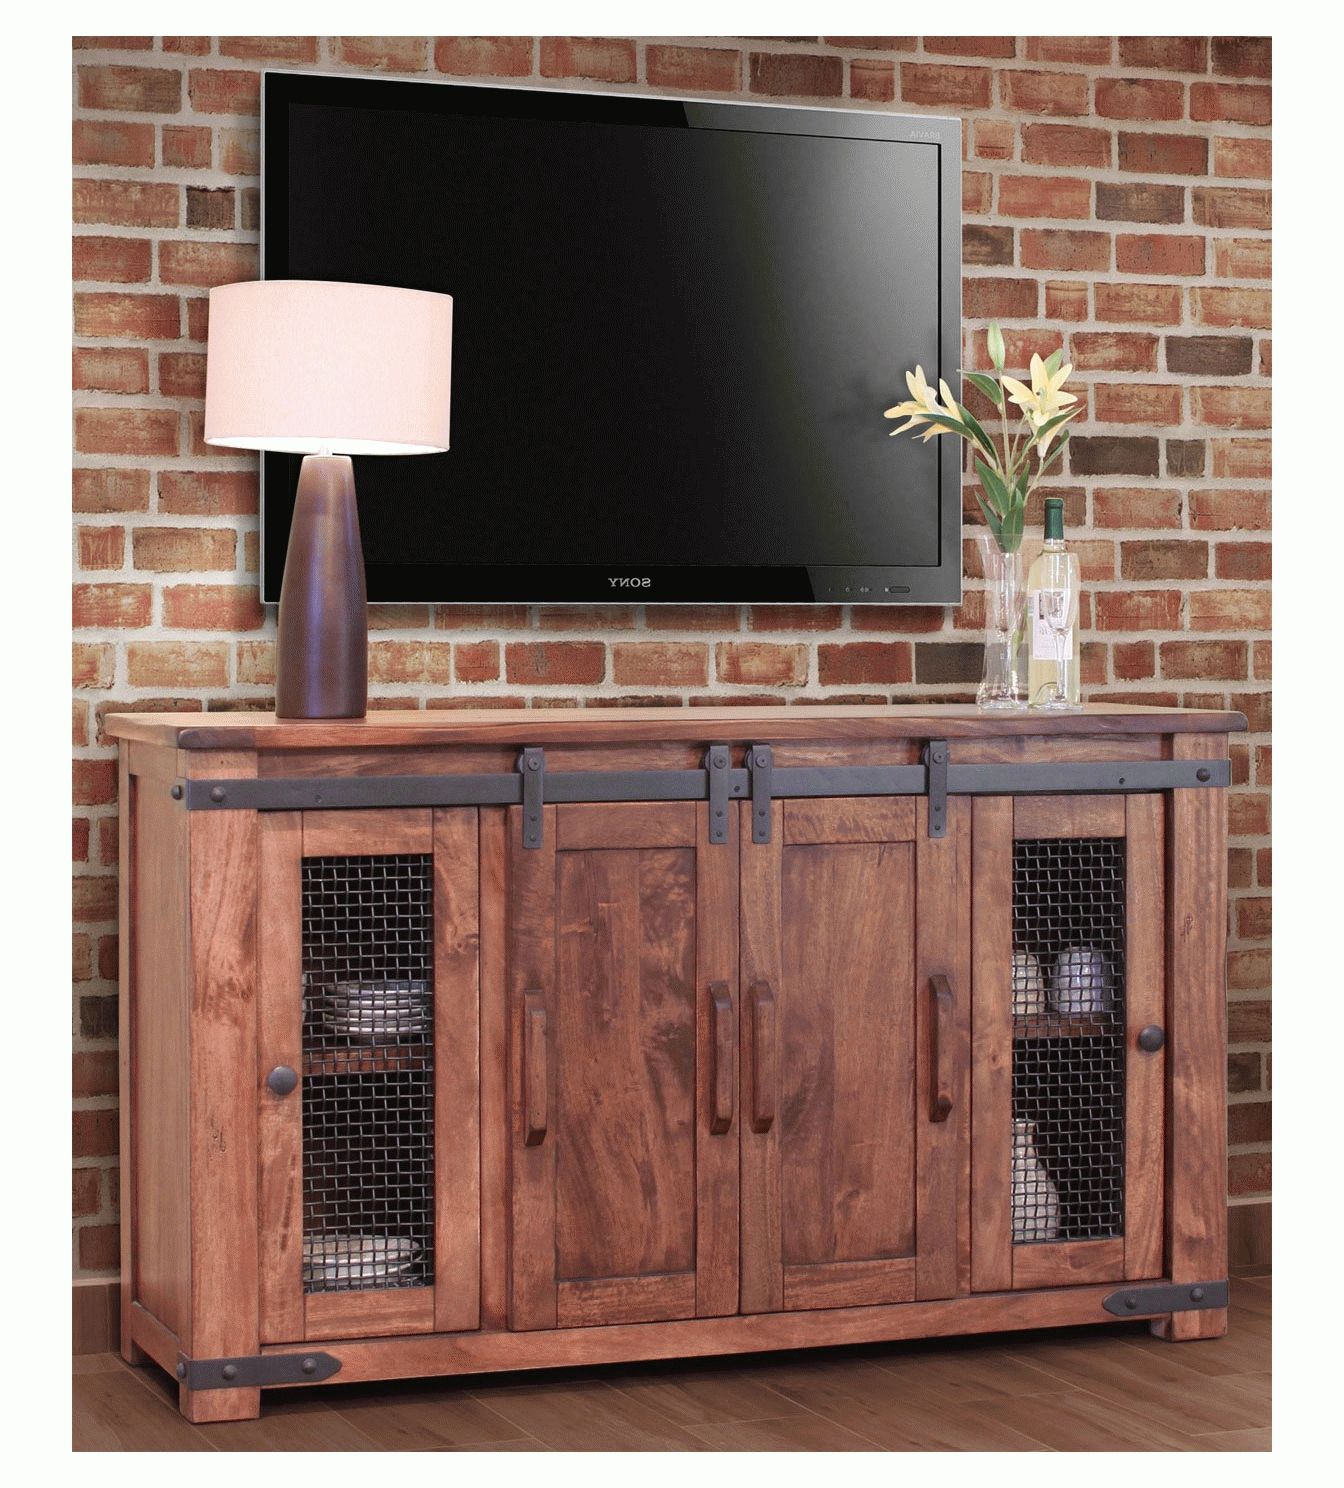 Rustic Tv Stand, Wood Tv Stand, Pine Tv Stand Inside Pine Wood Tv Stands (View 4 of 15)